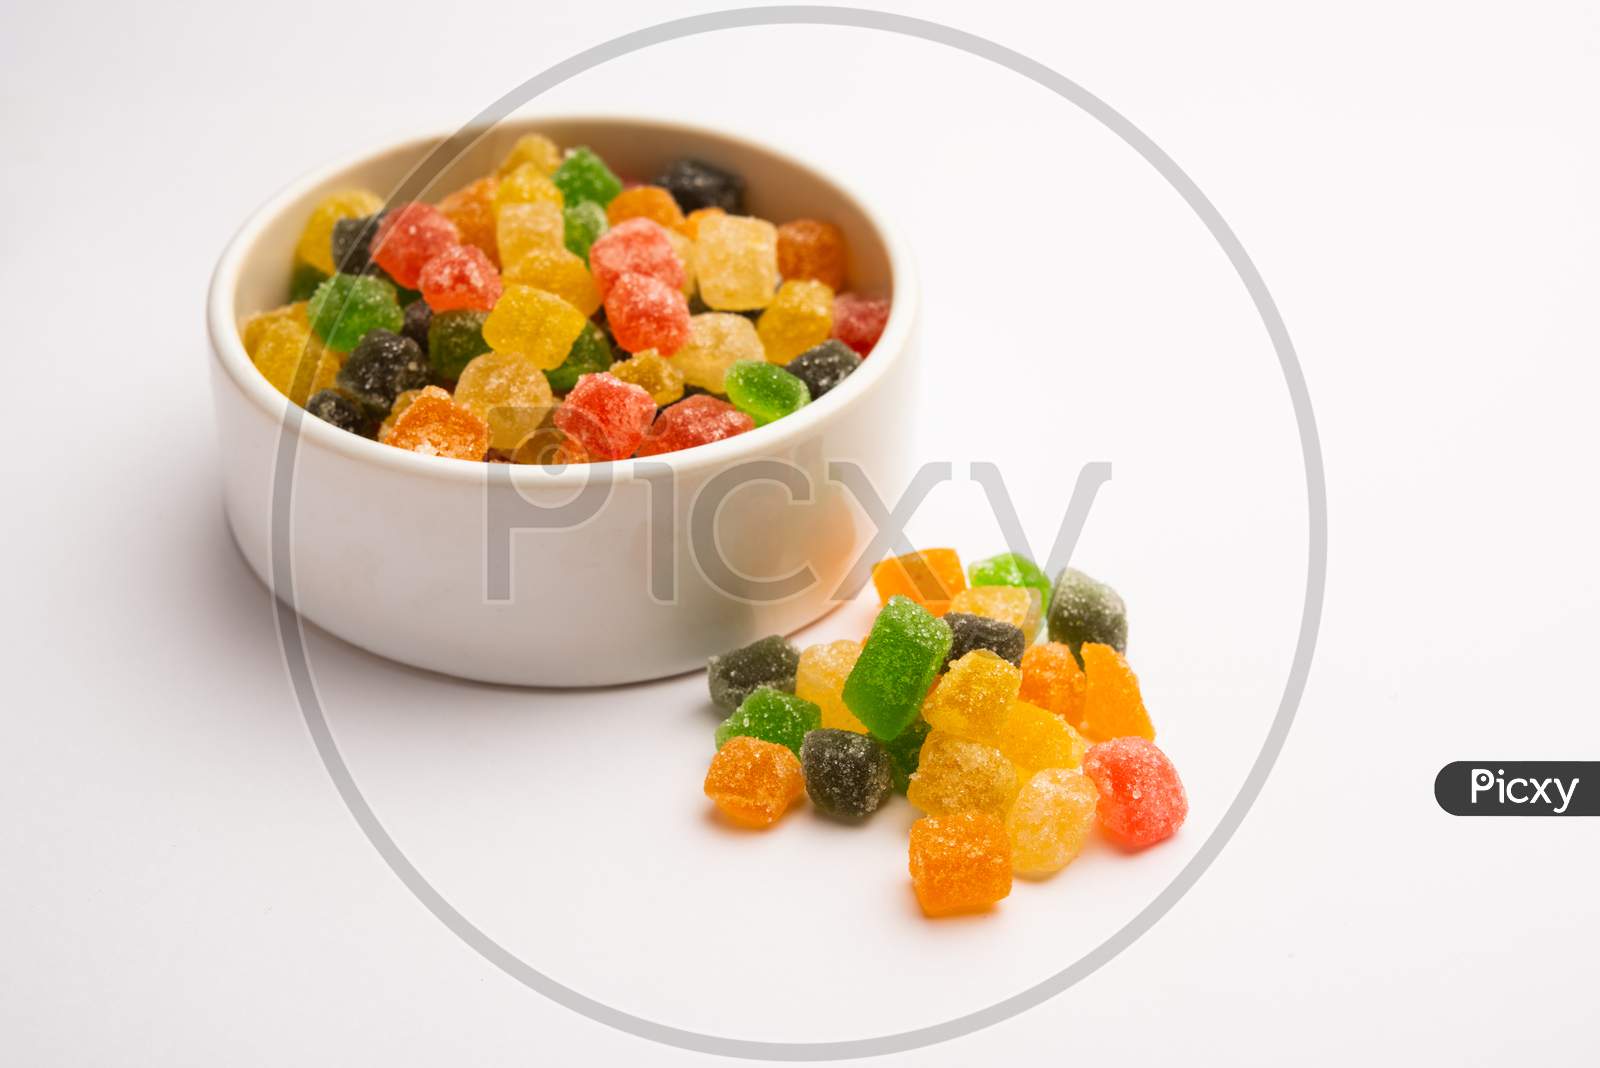 Indian Colorful Candy And Jelly Bites Sweet, Fruit Flavoured Confectionery Coated With Sugar, Served In A Plate Or Bowl